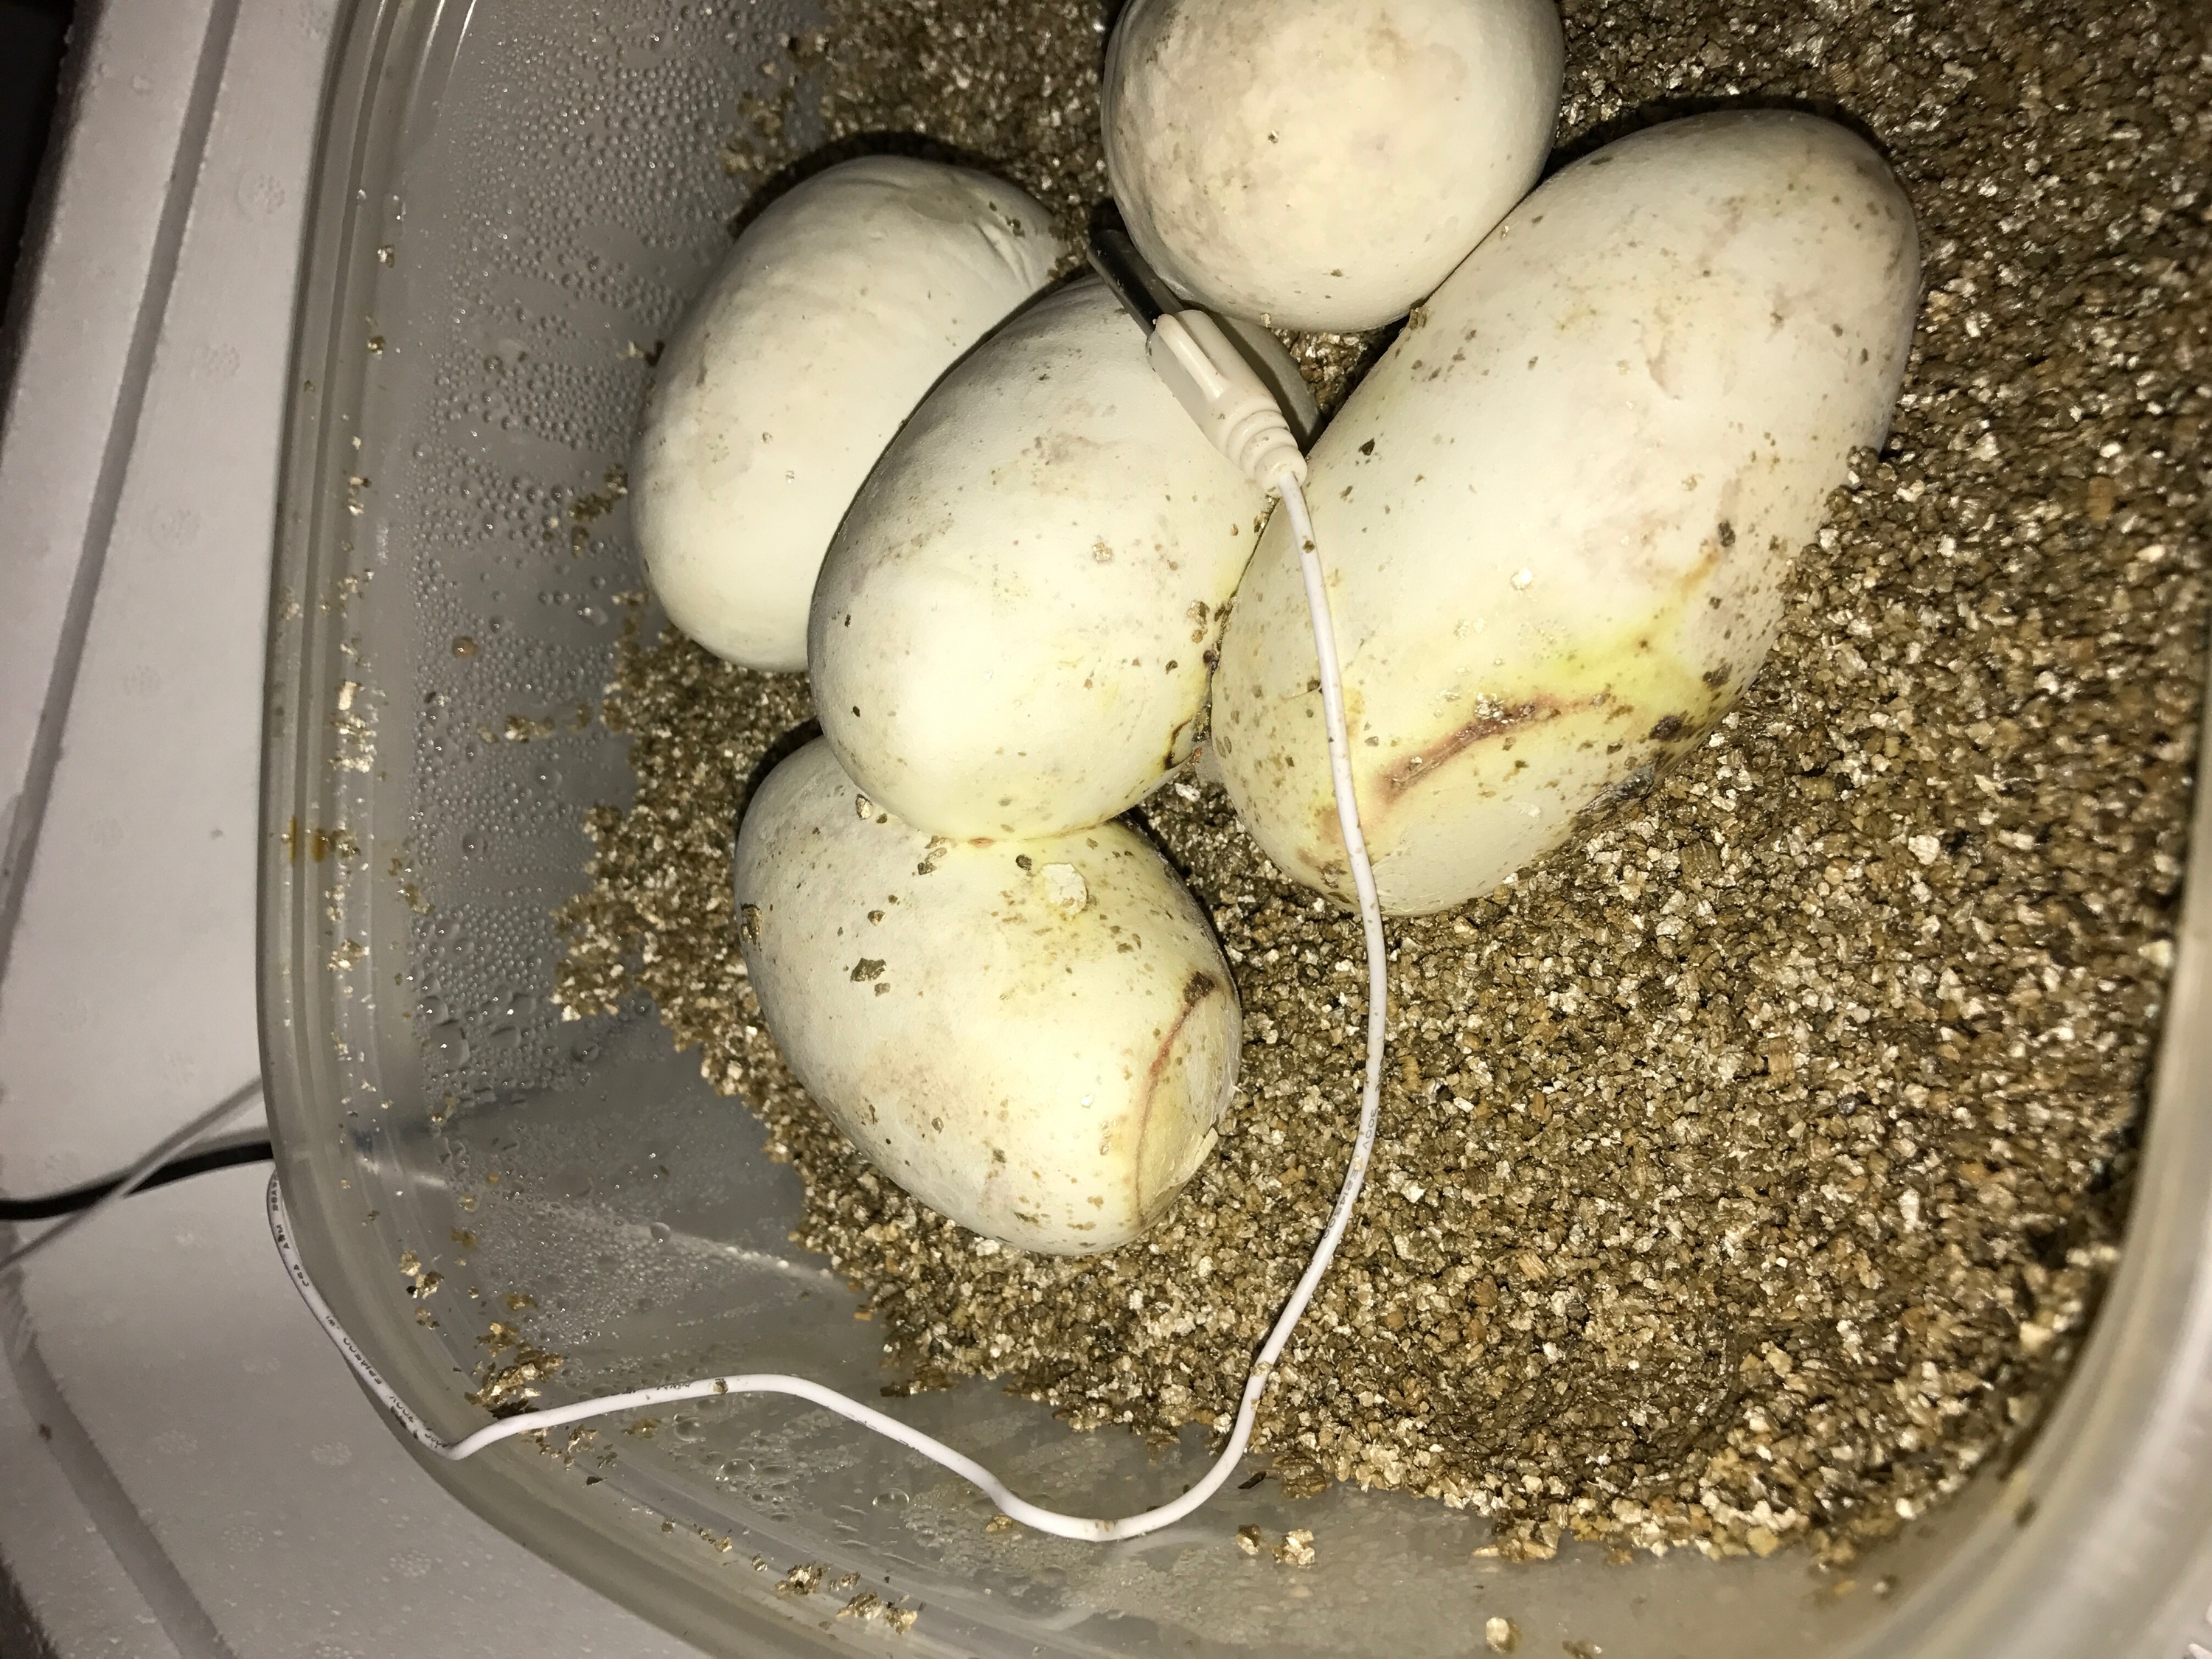 5 Ball Python eggs in an egg box. 2 eggs have spots where old eggs were removed.